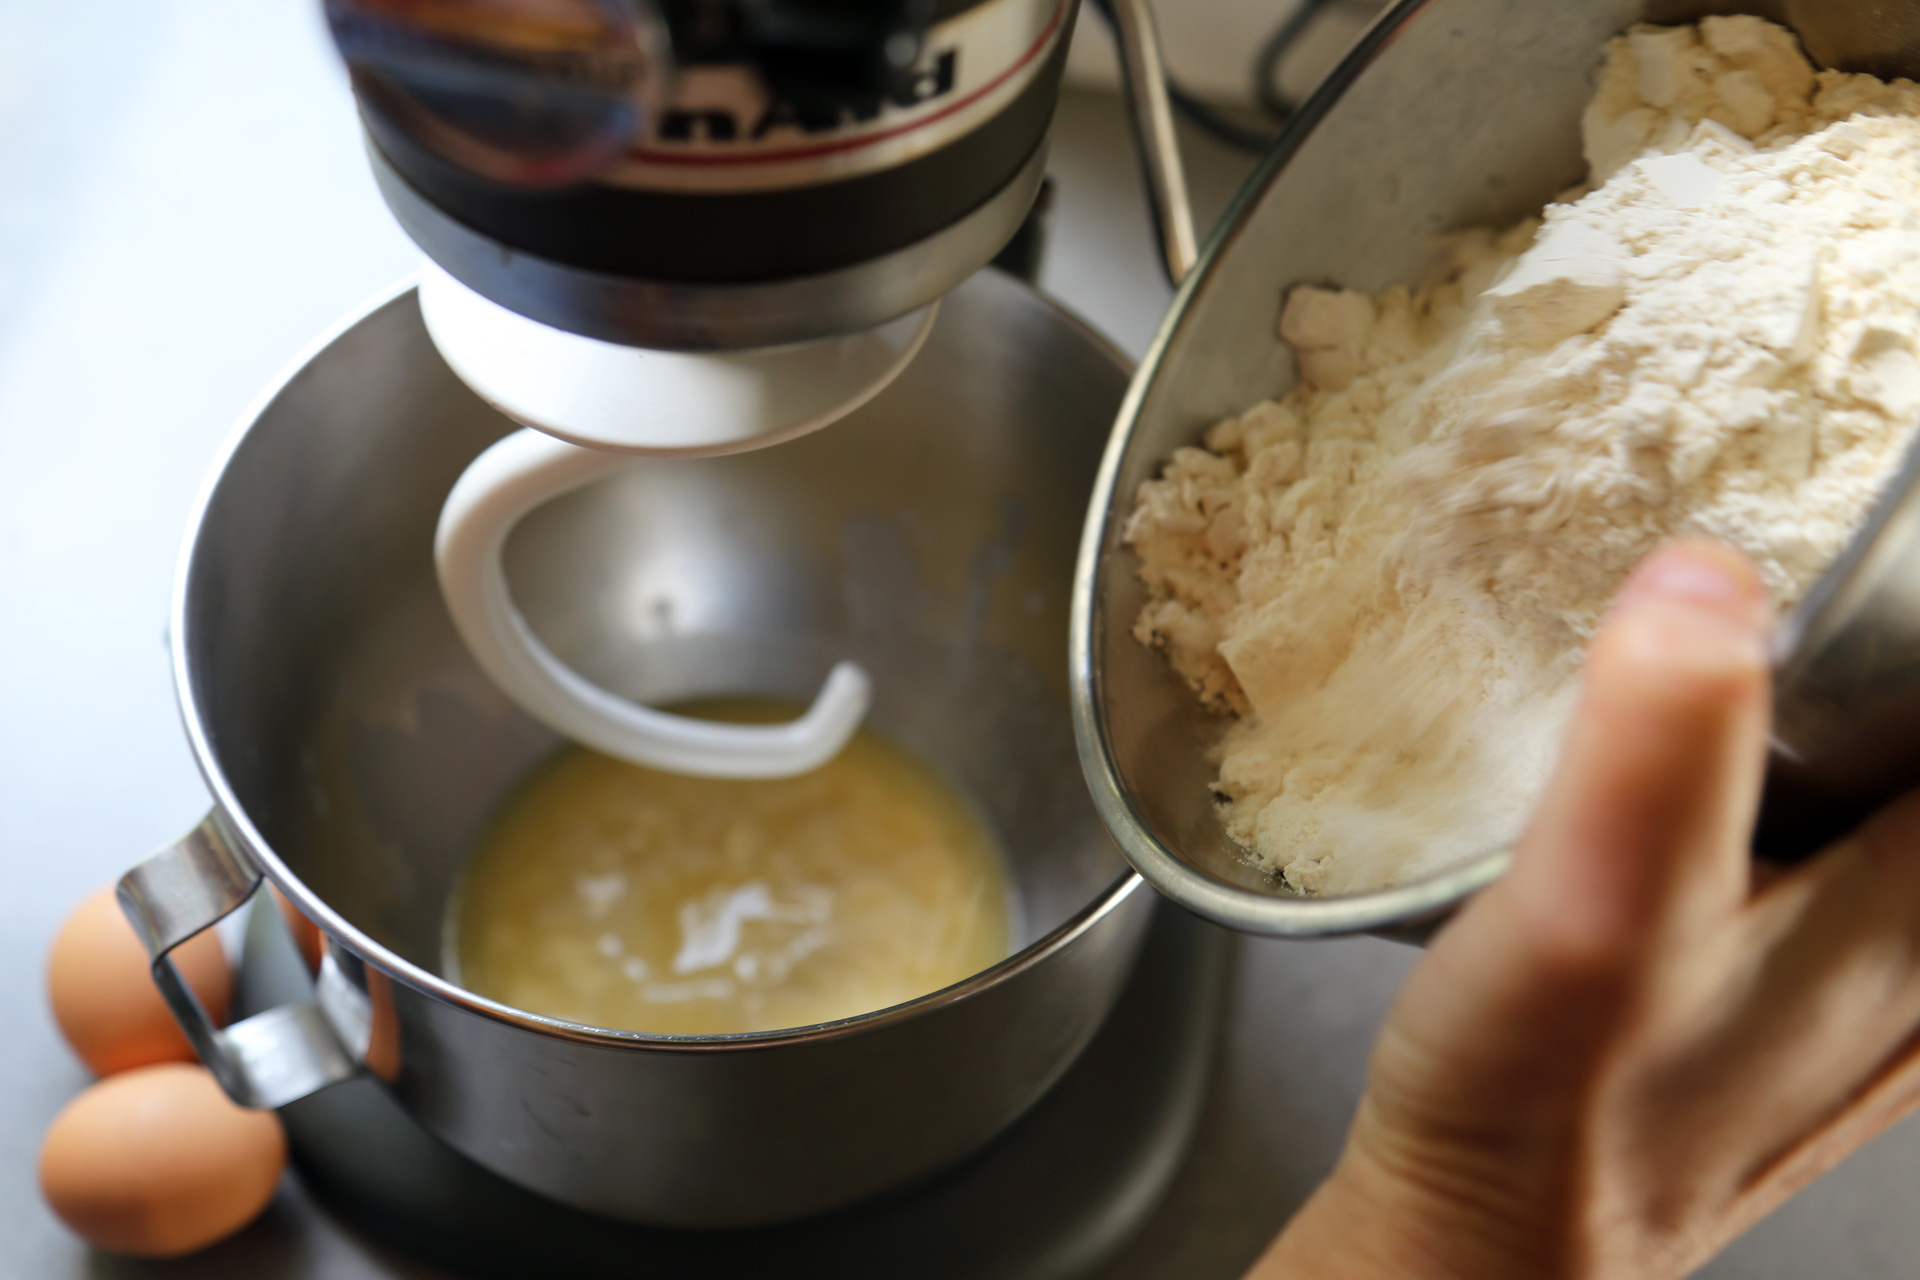 Pour the milk mixture into the stand mixer and stir to combine with the yeast.